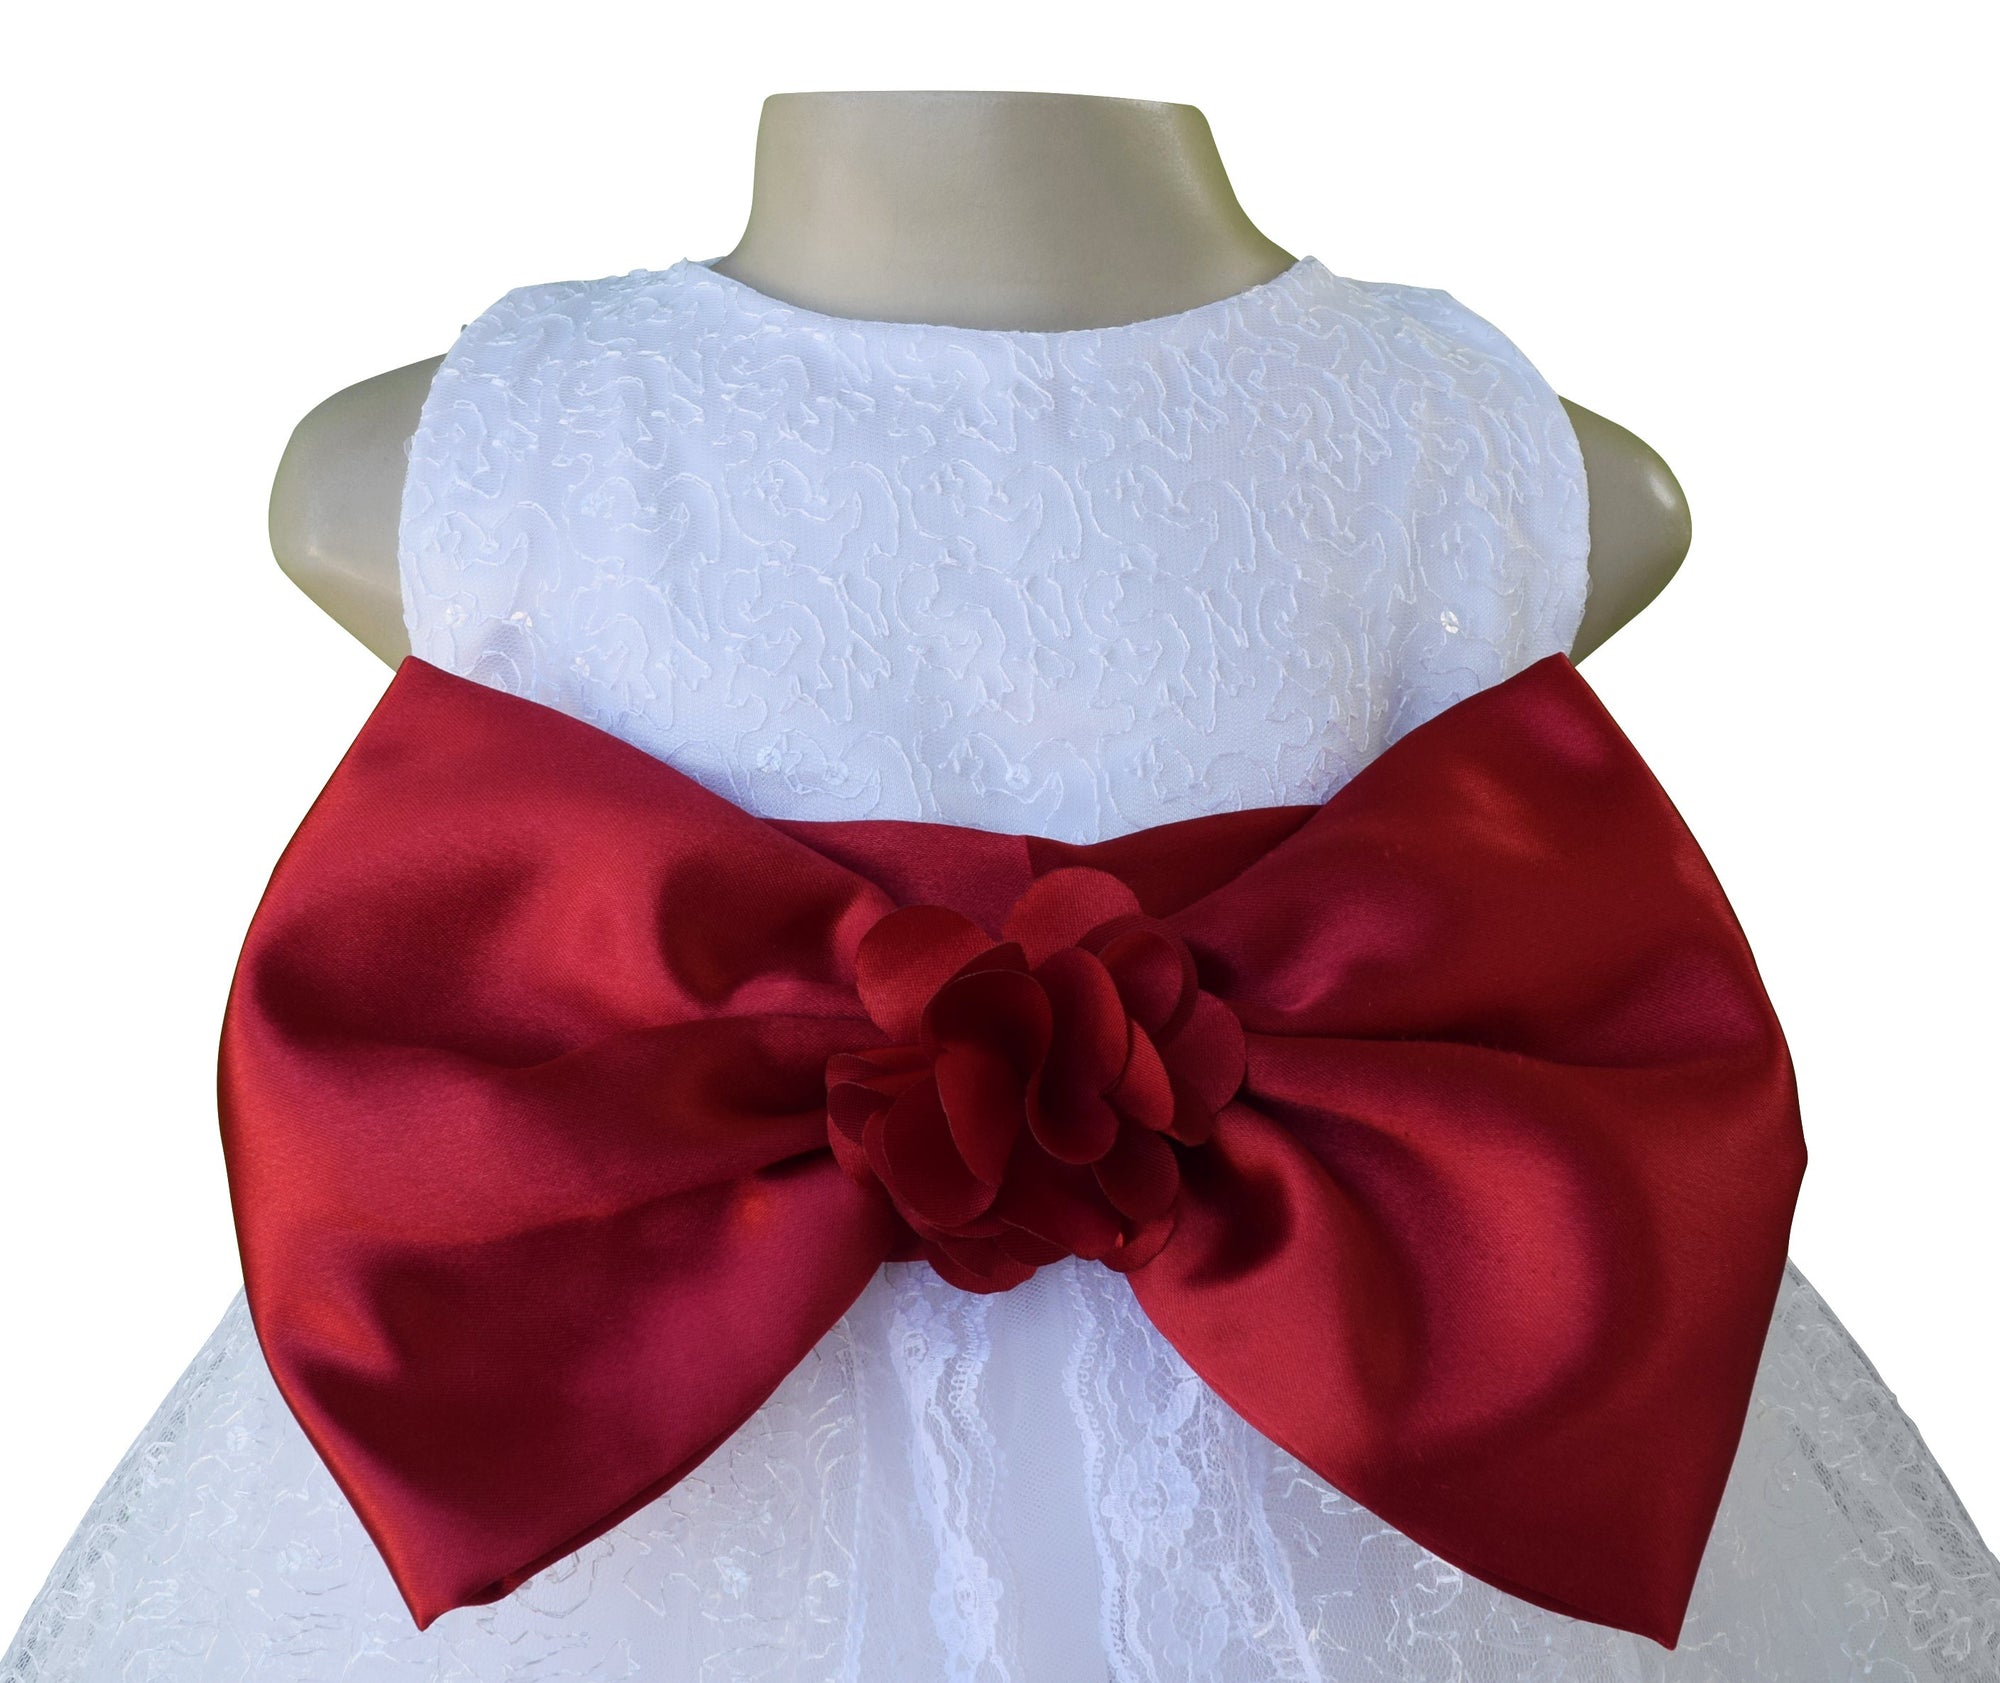 Faye White Embroidered Gown with Maroon Bow & Sash